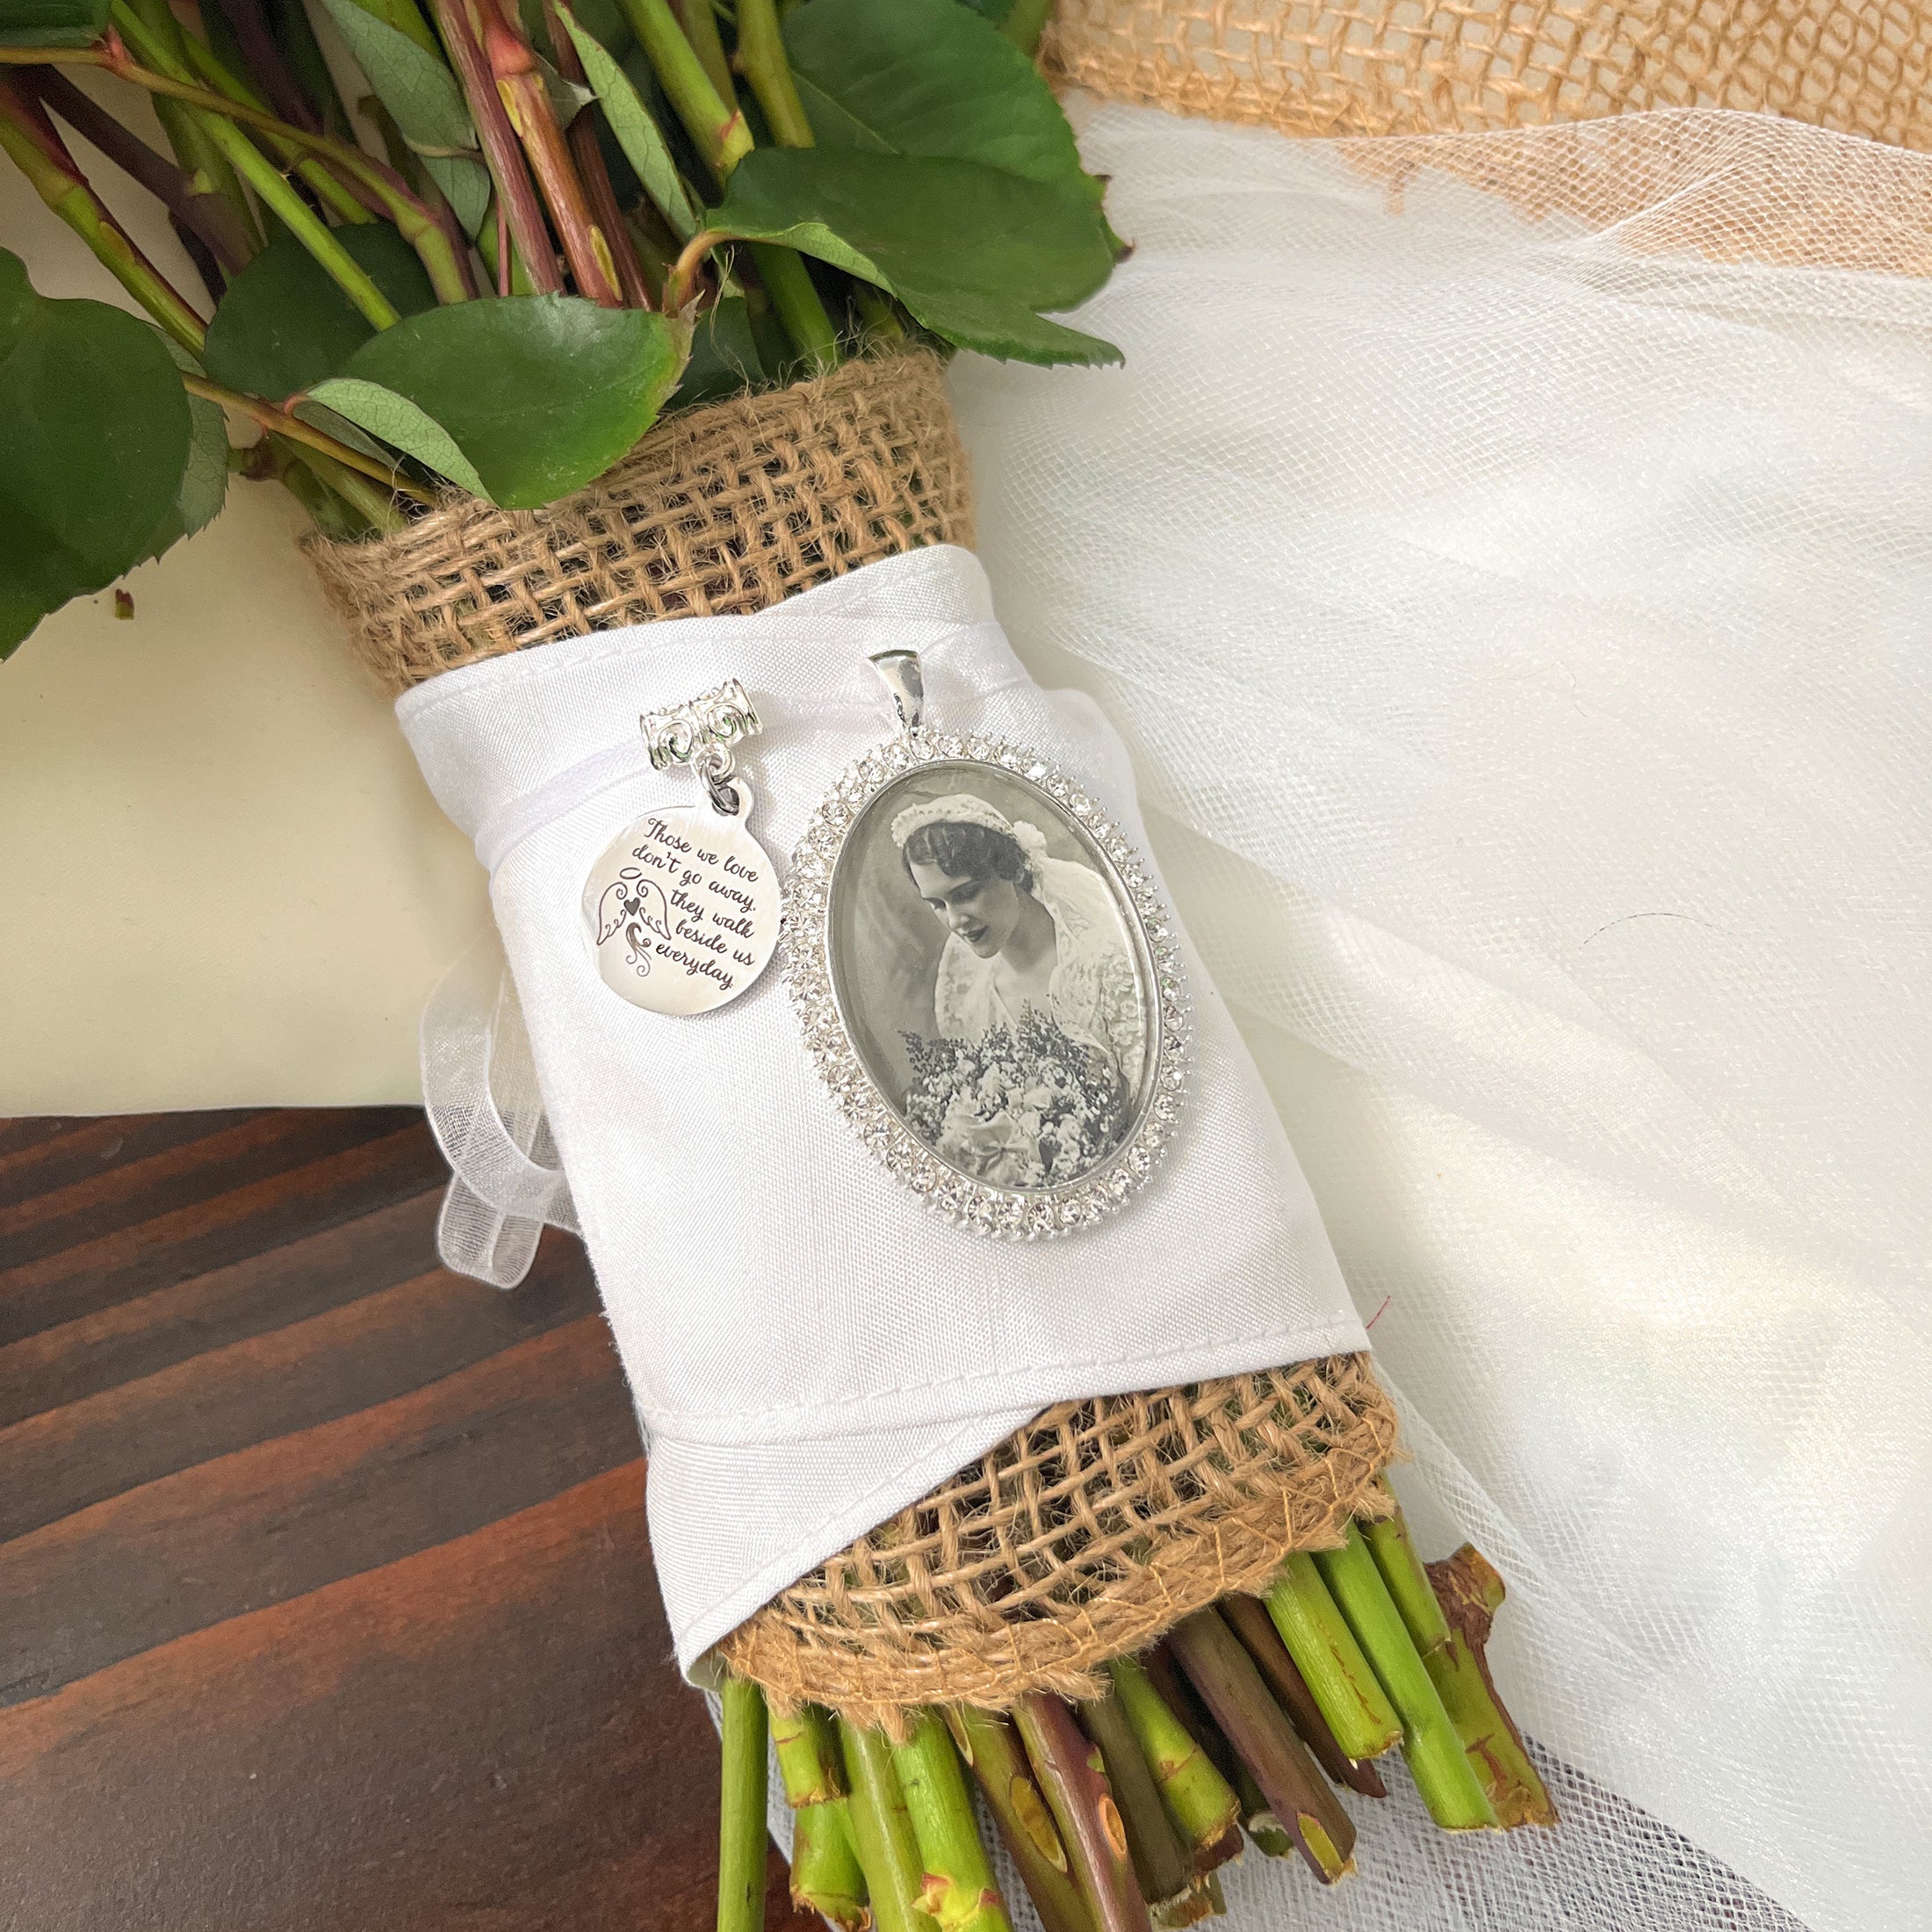 Memorial Photo Charm-Bouquet Charm for Wedding-Remembrance Memory Gift